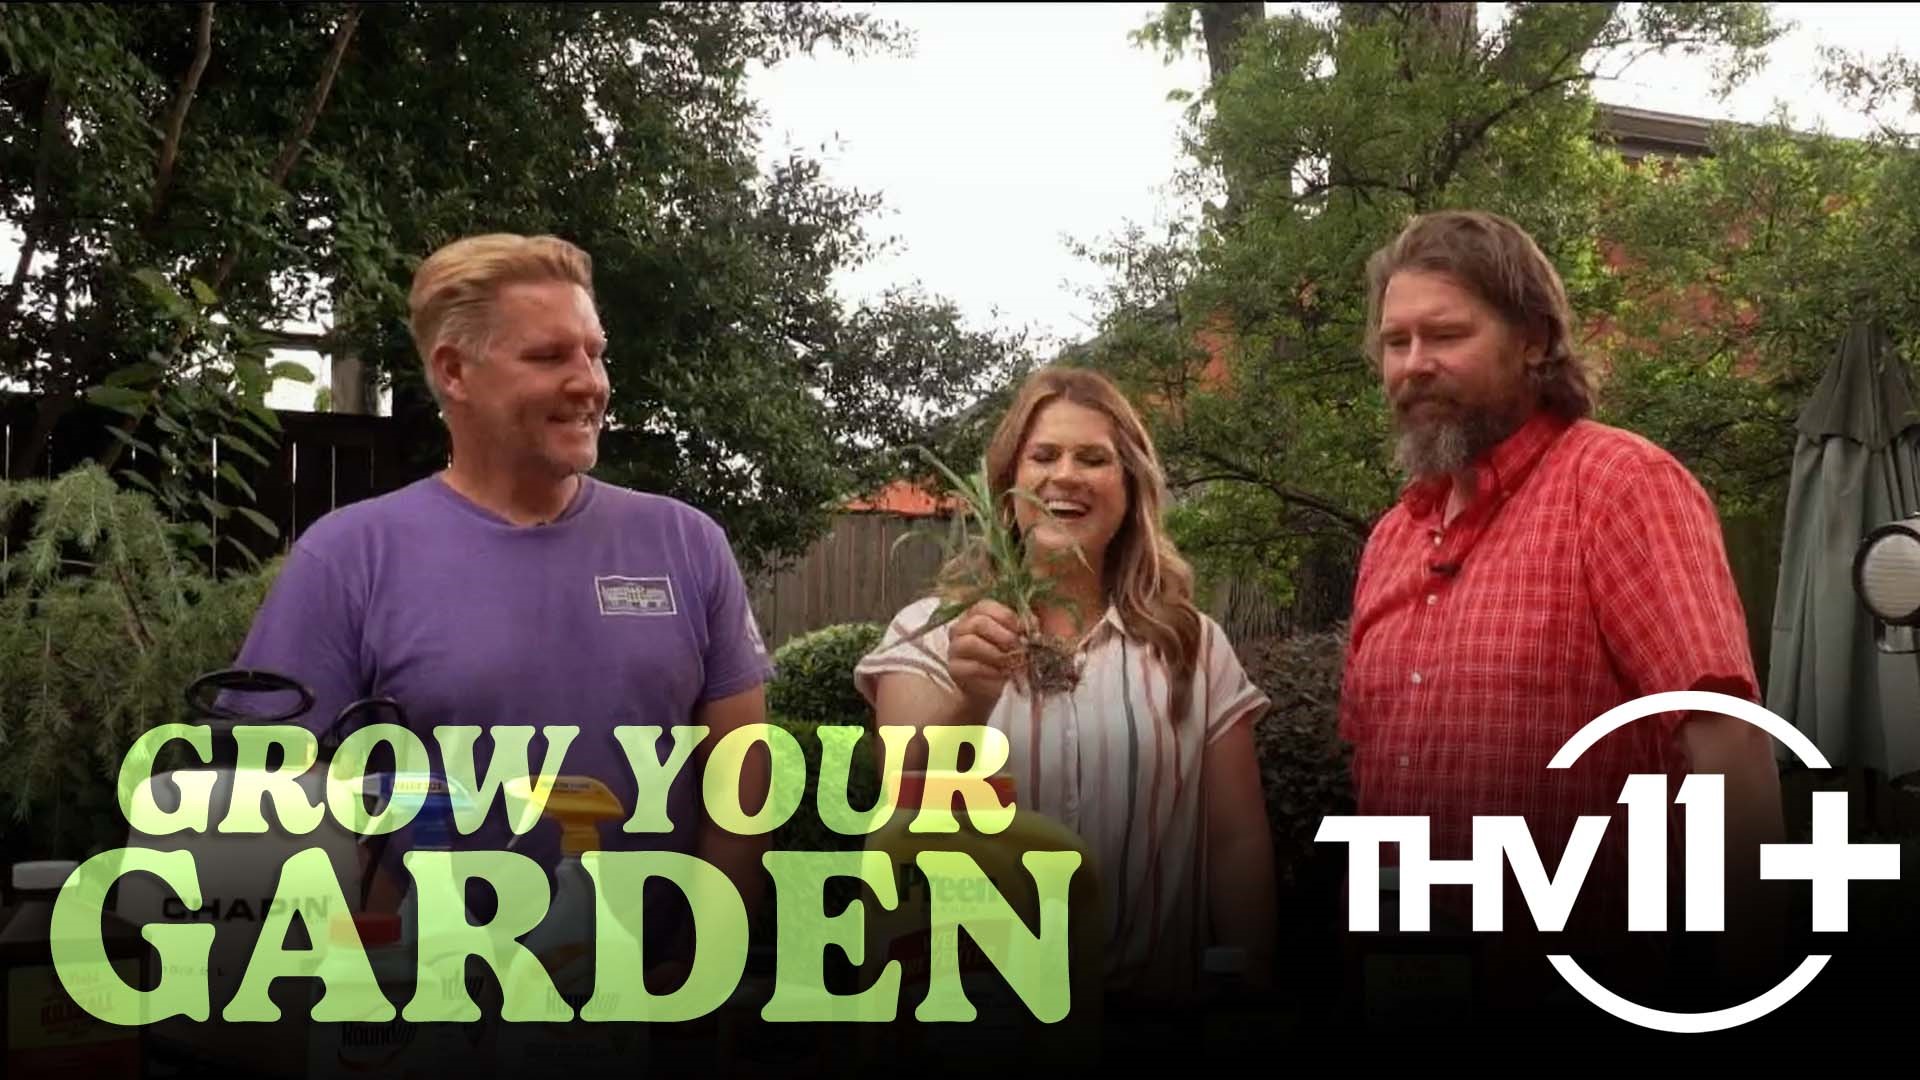 Chris H. Olsen gives the latest tips for growing your garden including advice on planting succulents and helping your roses flourish.